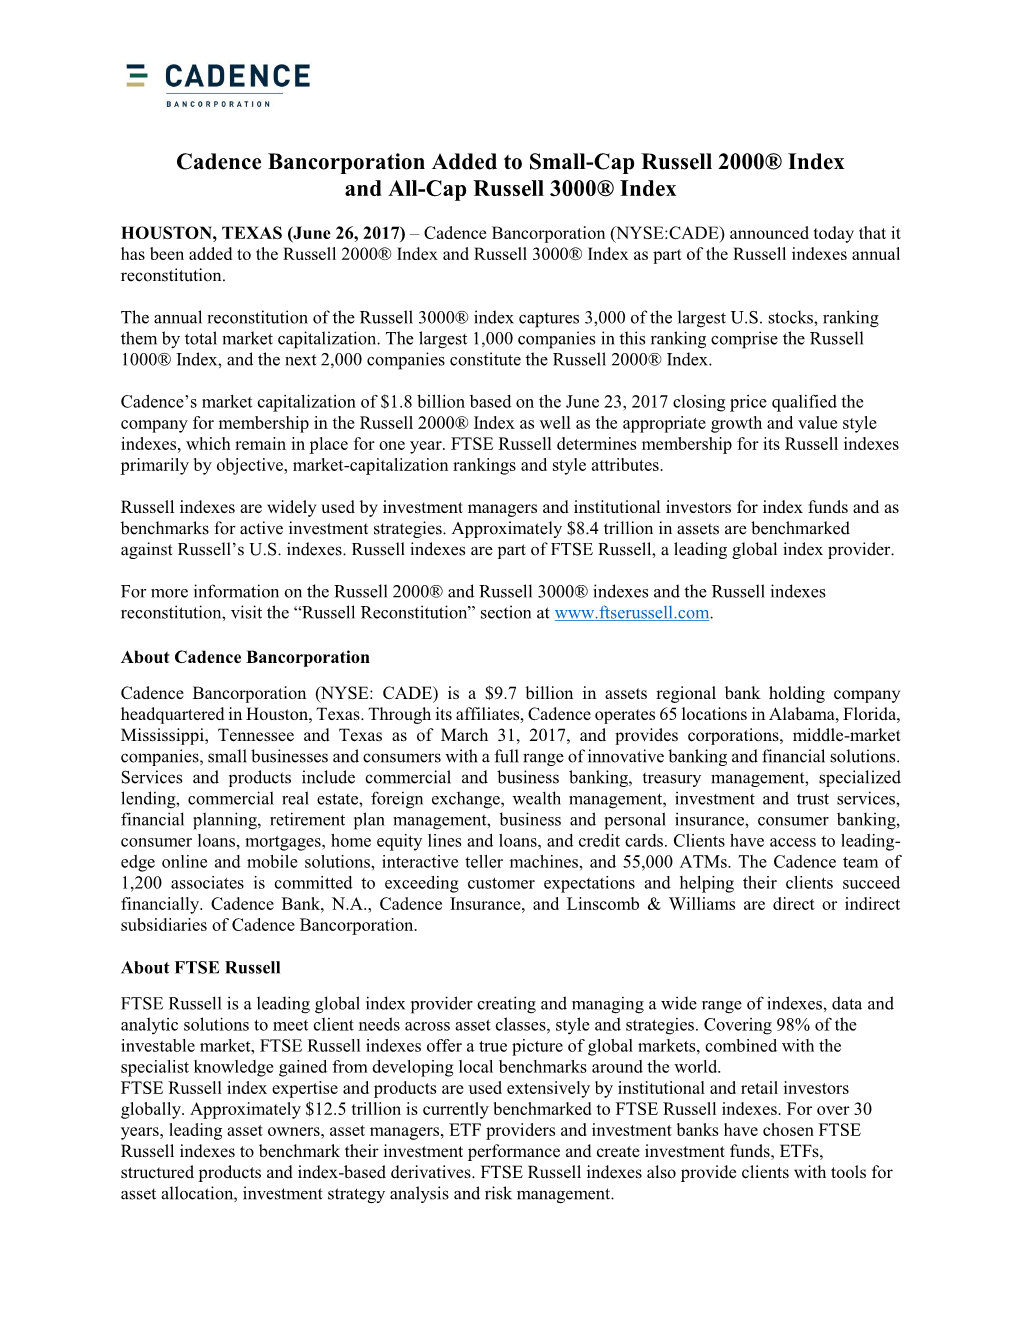 Cadence Bancorporation Added to Small-Cap Russell 2000® Index and All-Cap Russell 3000® Index